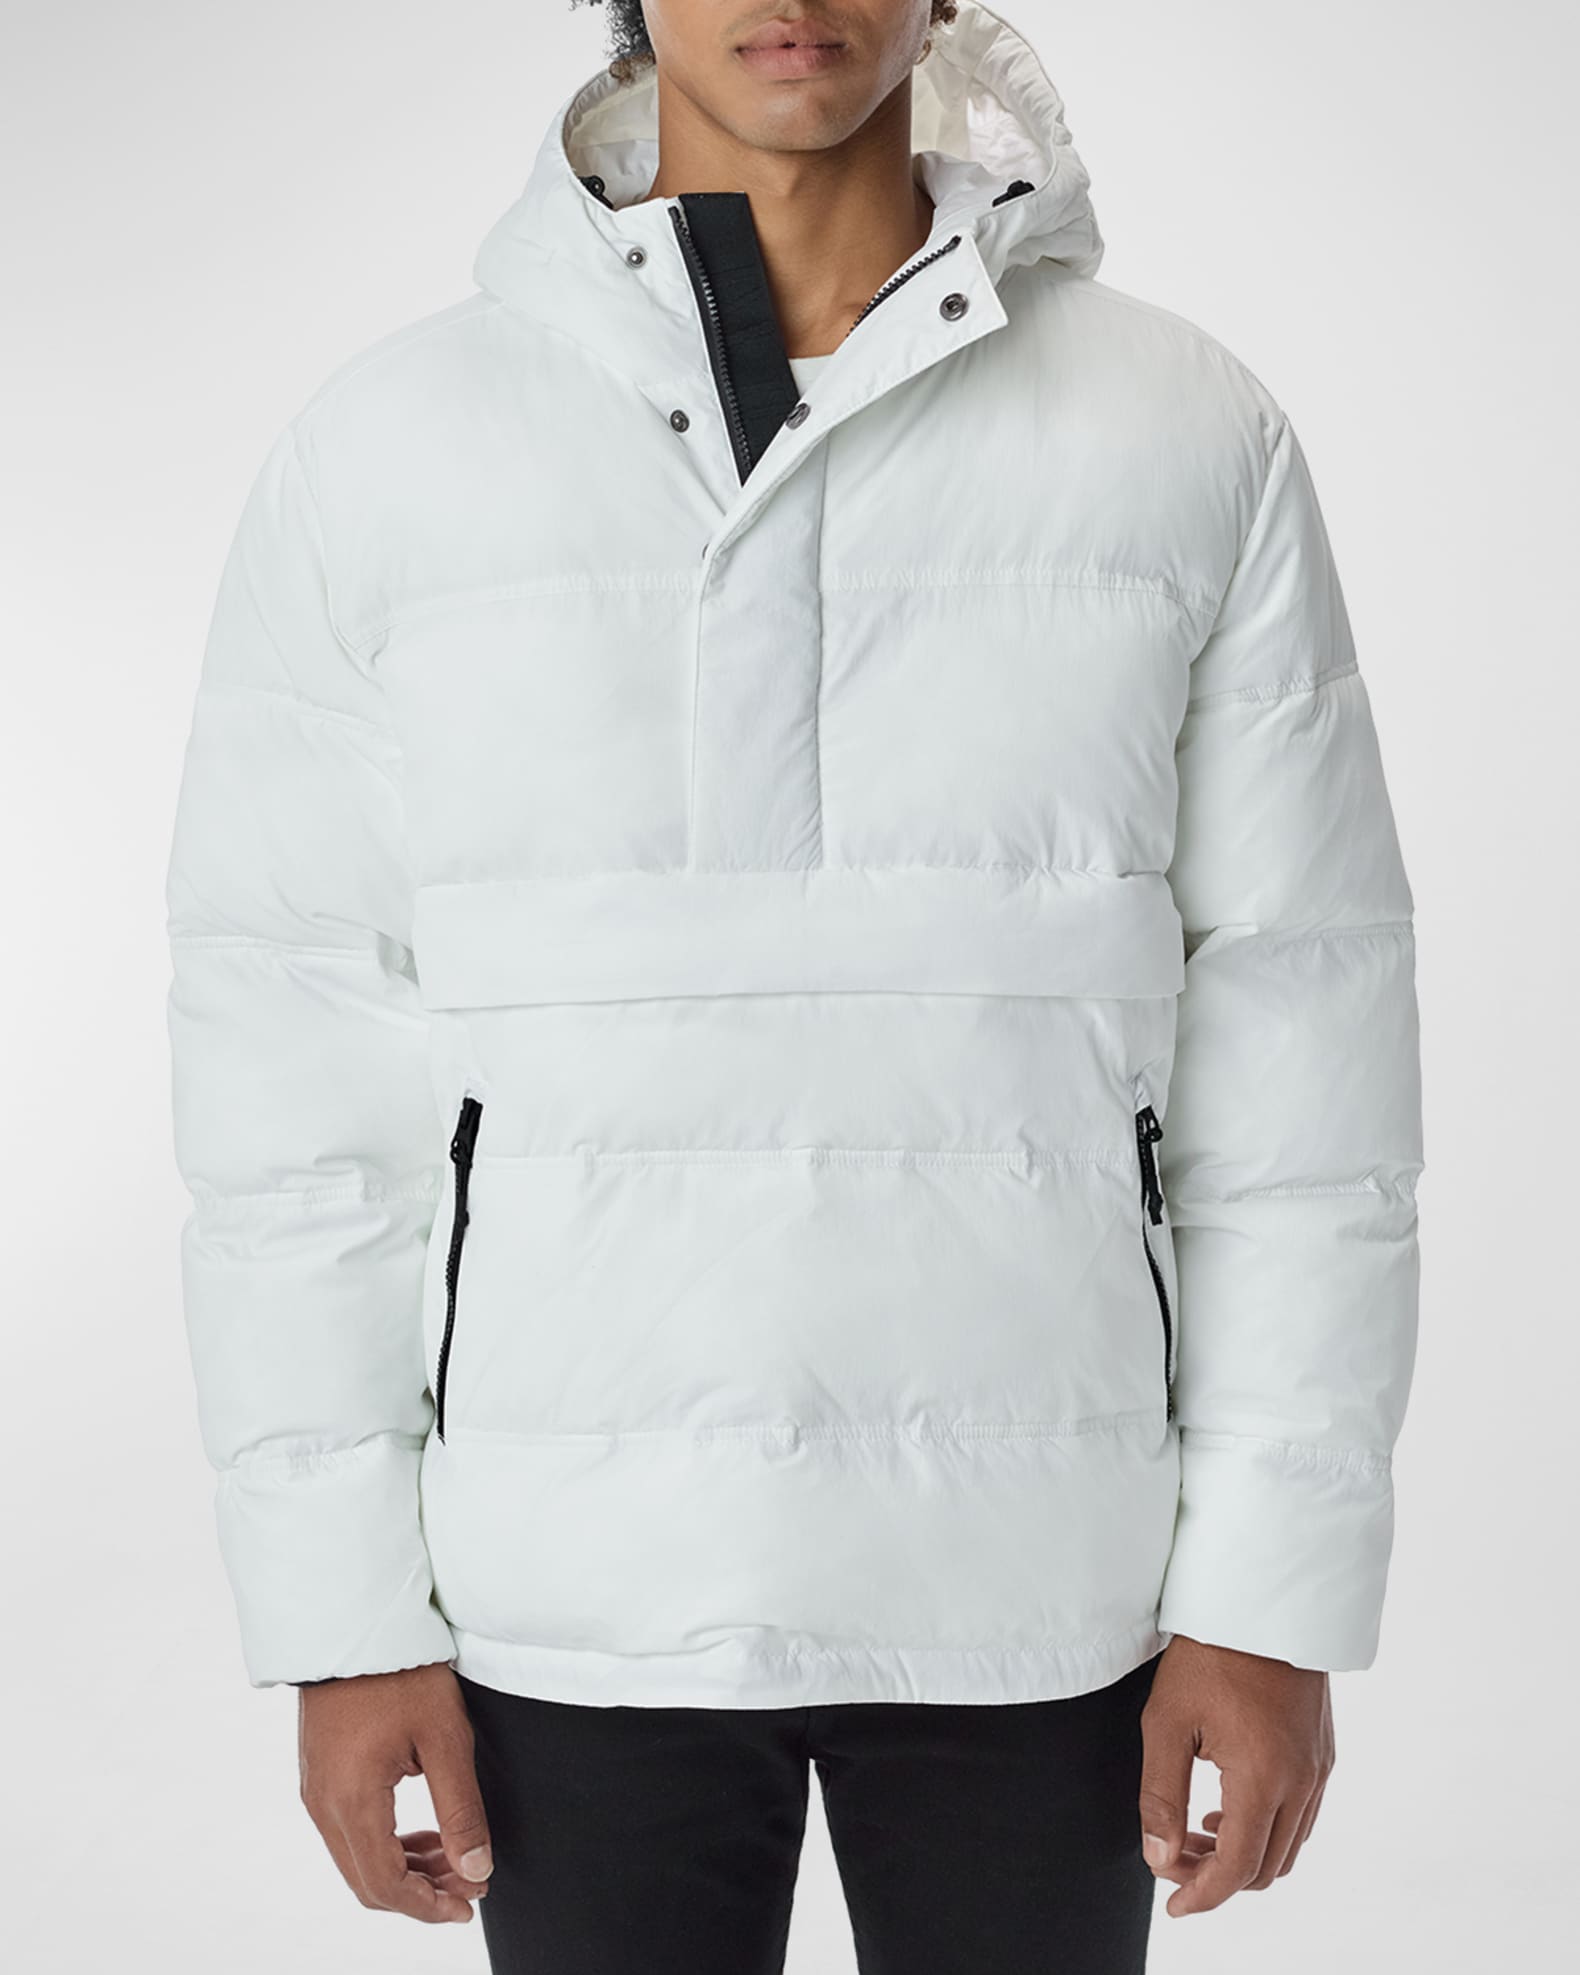 The Very Warm Men's Packable Pullover Puffer Jacket | Neiman Marcus